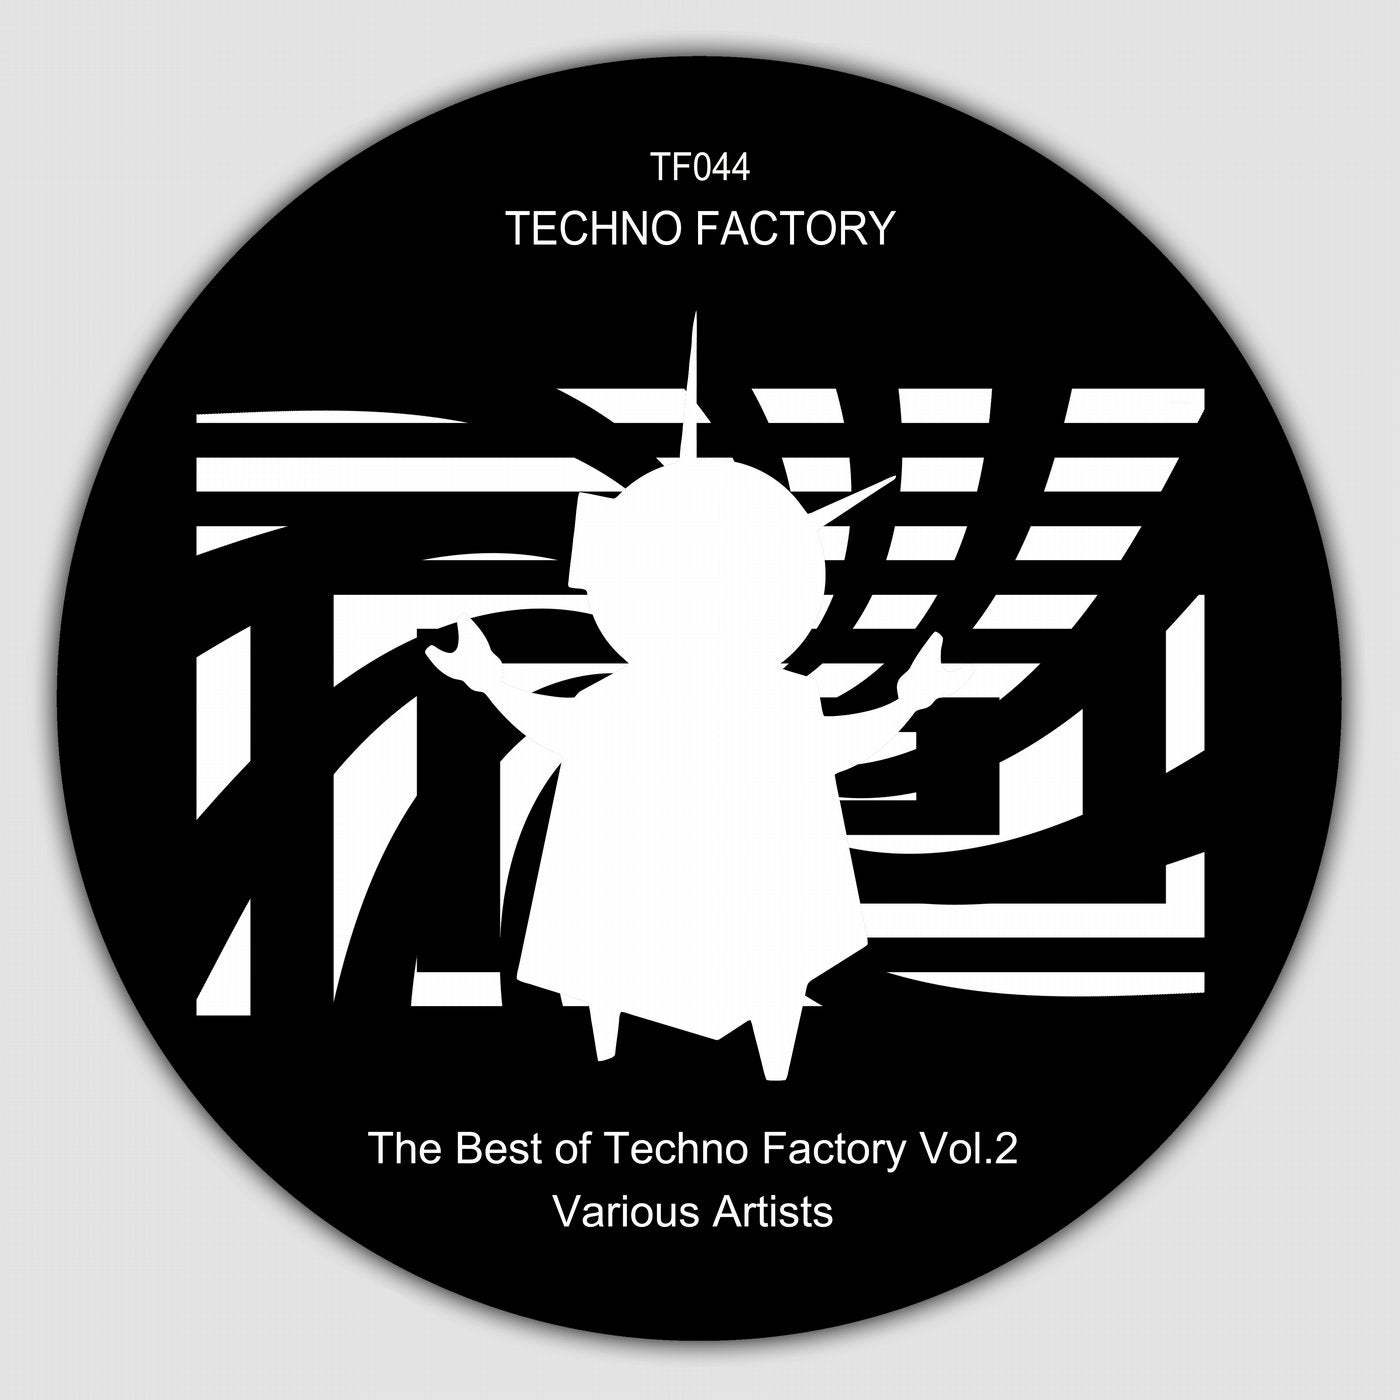 The Best of Techno Factory, Vol.2